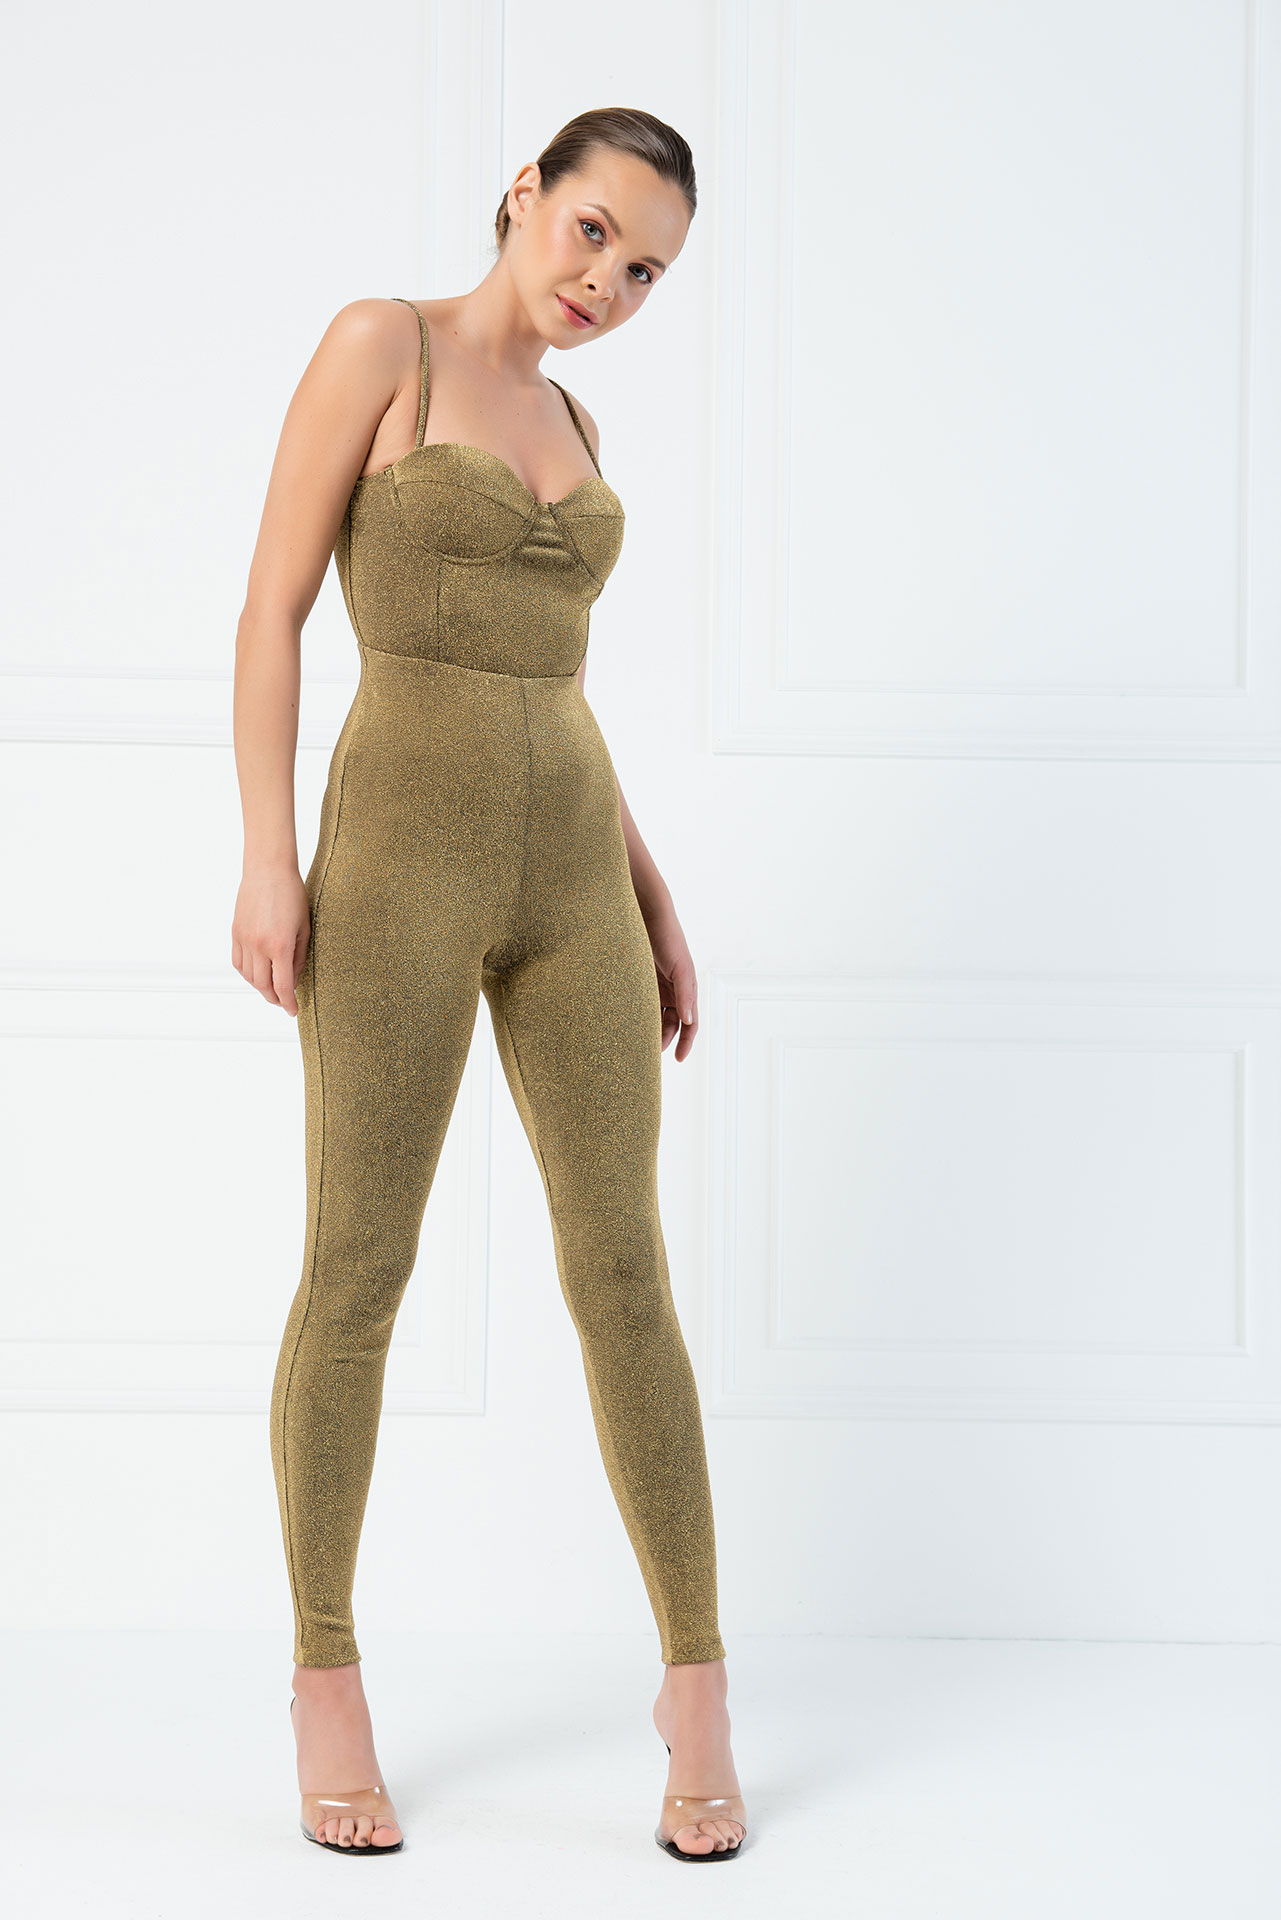 Wholesale Glittery Gold Sweetheart Catsuit